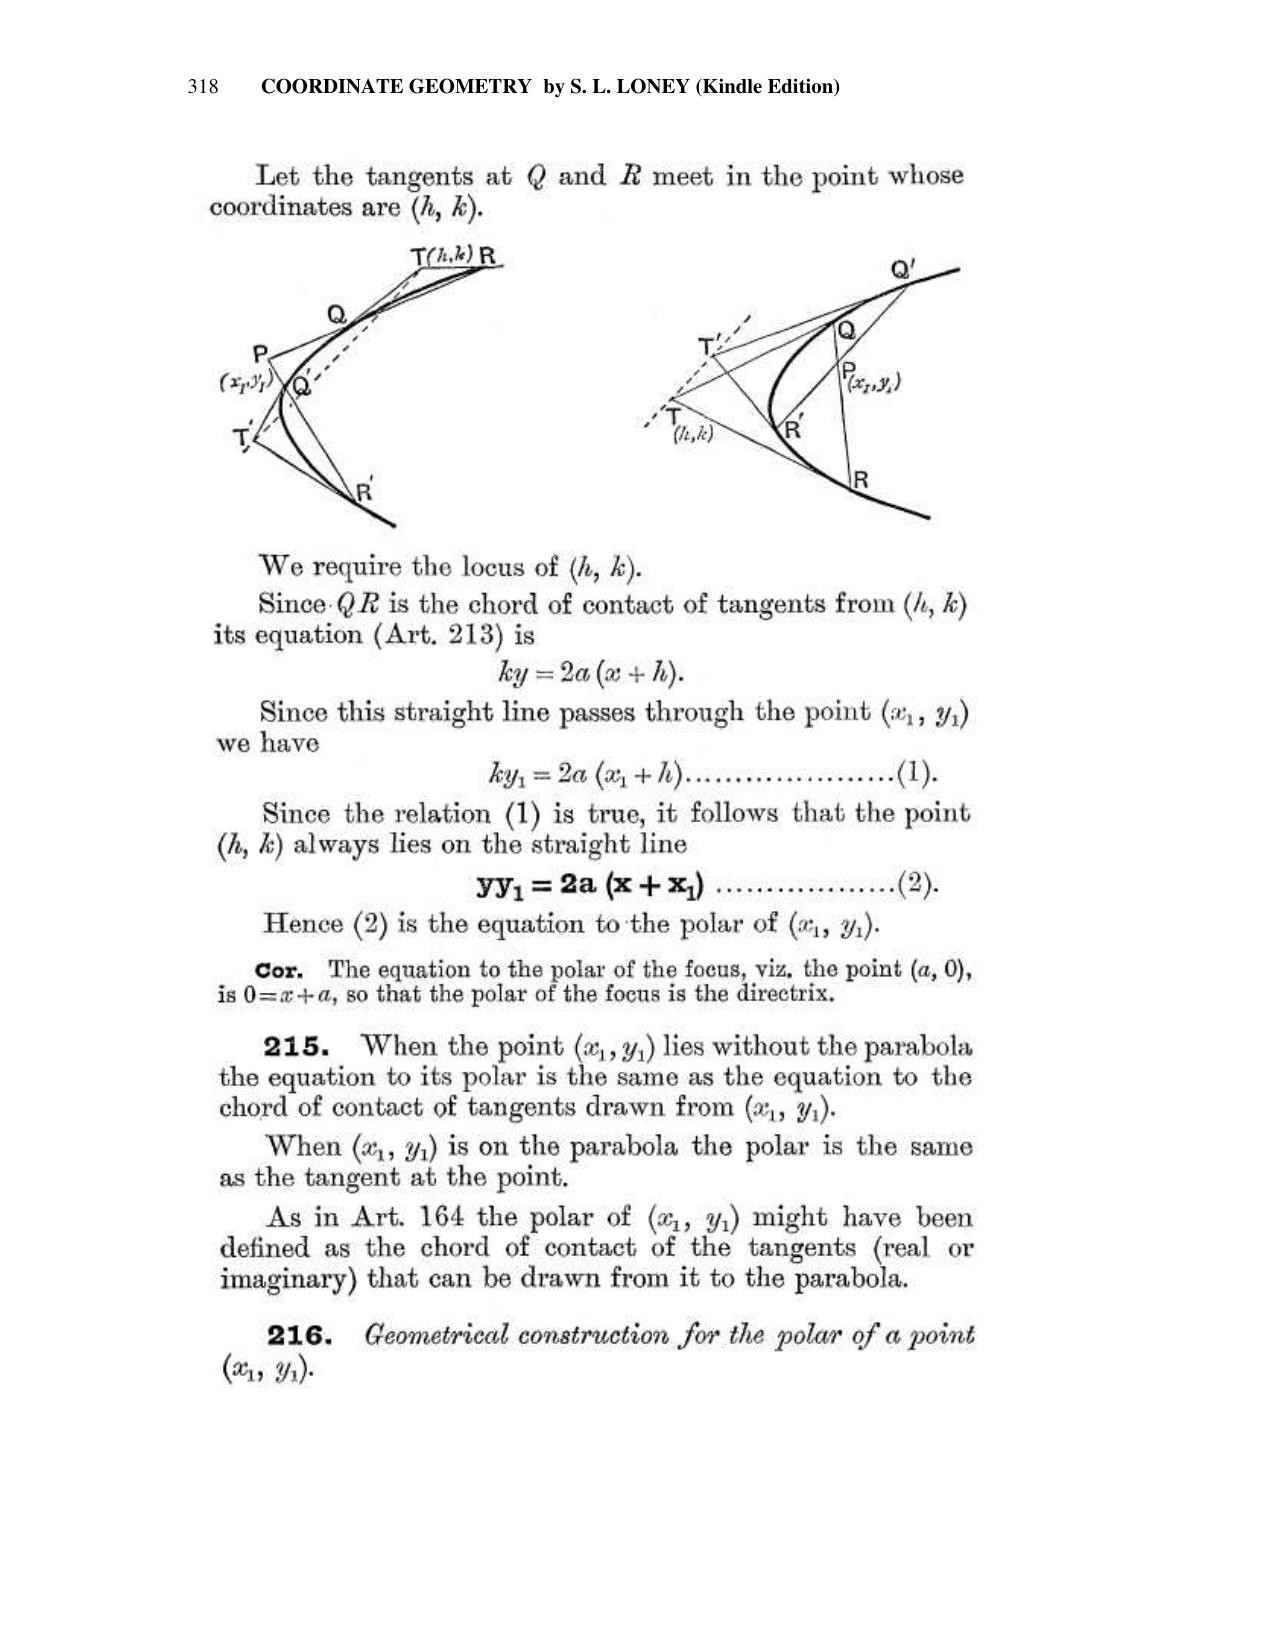 Chapter 10: The Parabola - SL Loney Solutions: The Elements of Coordinate Geometry - Page 32